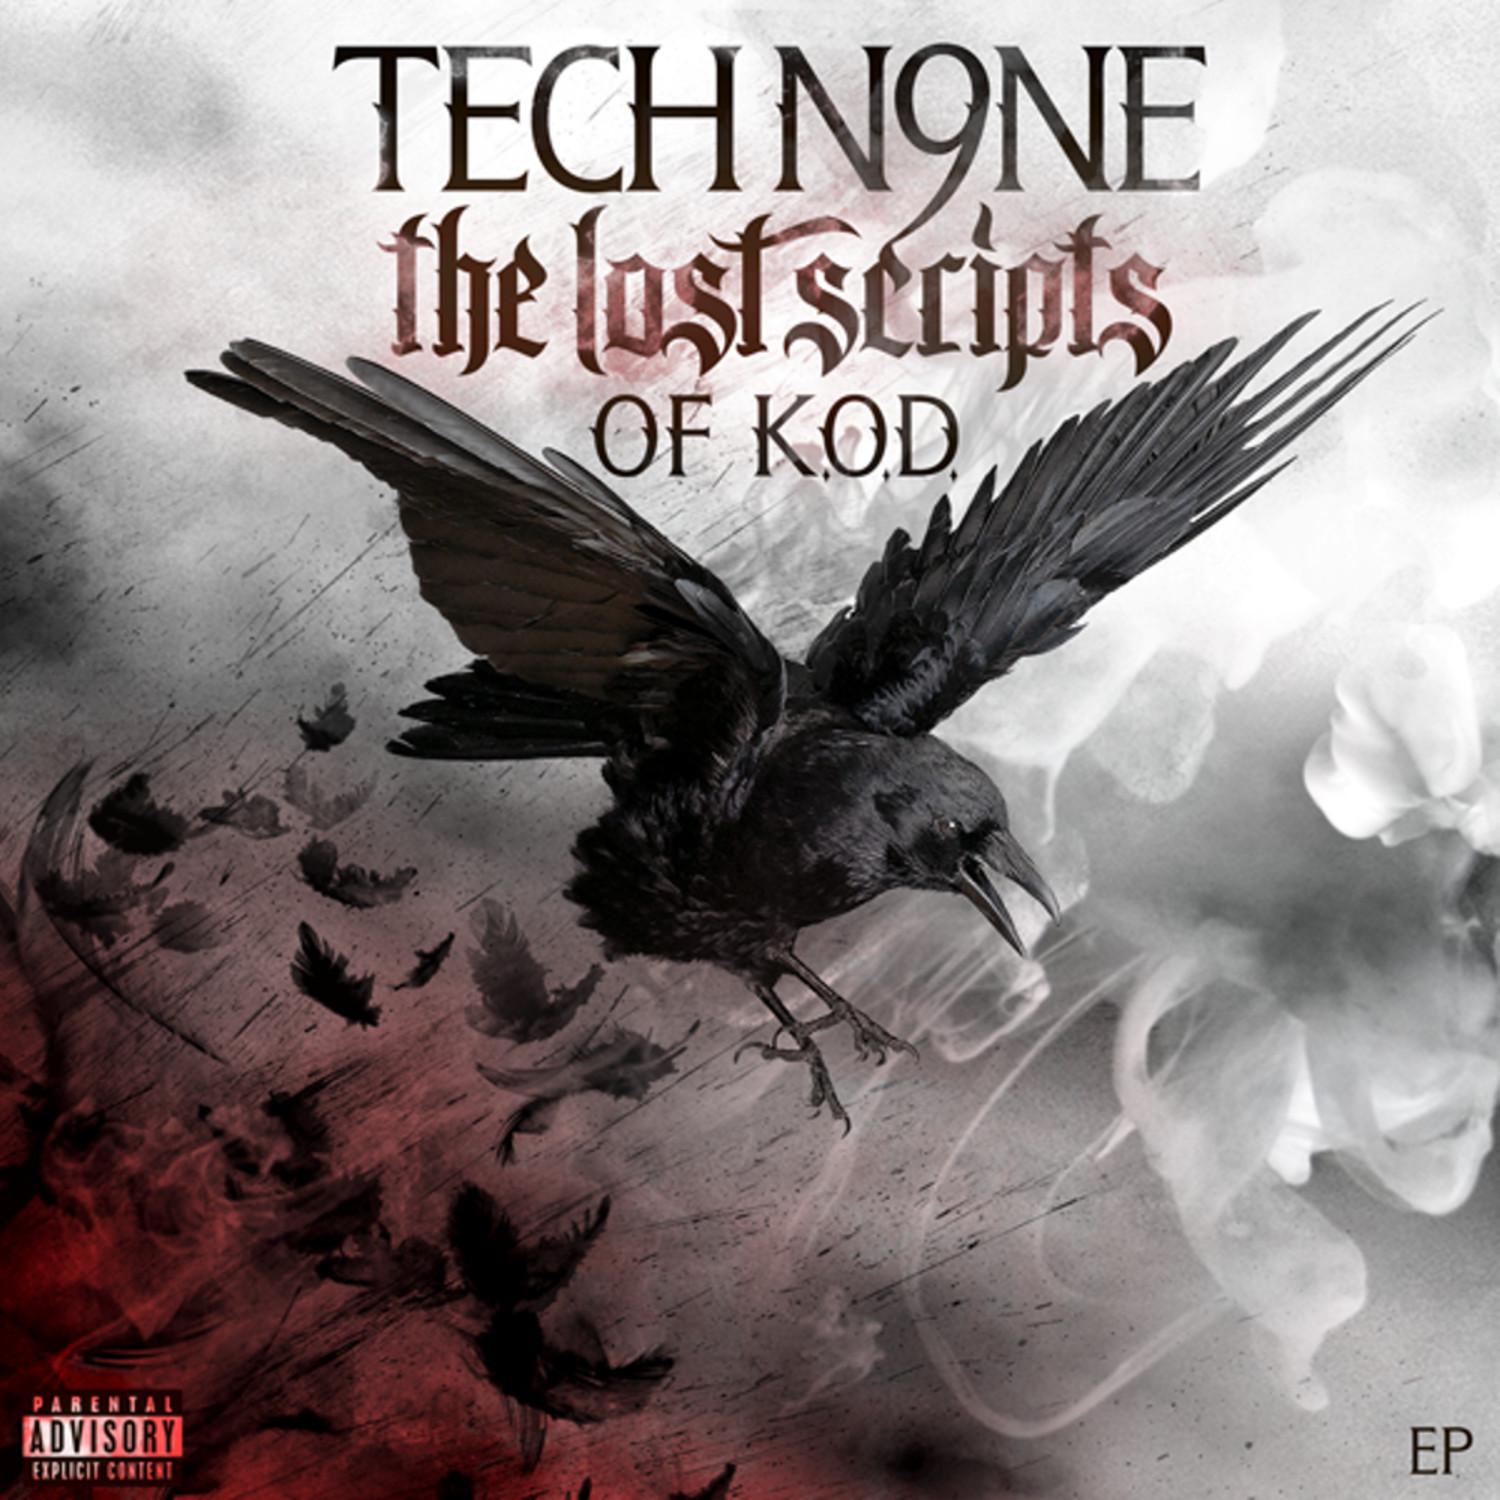 The Lost Scripts Of K.O.D. (EP)